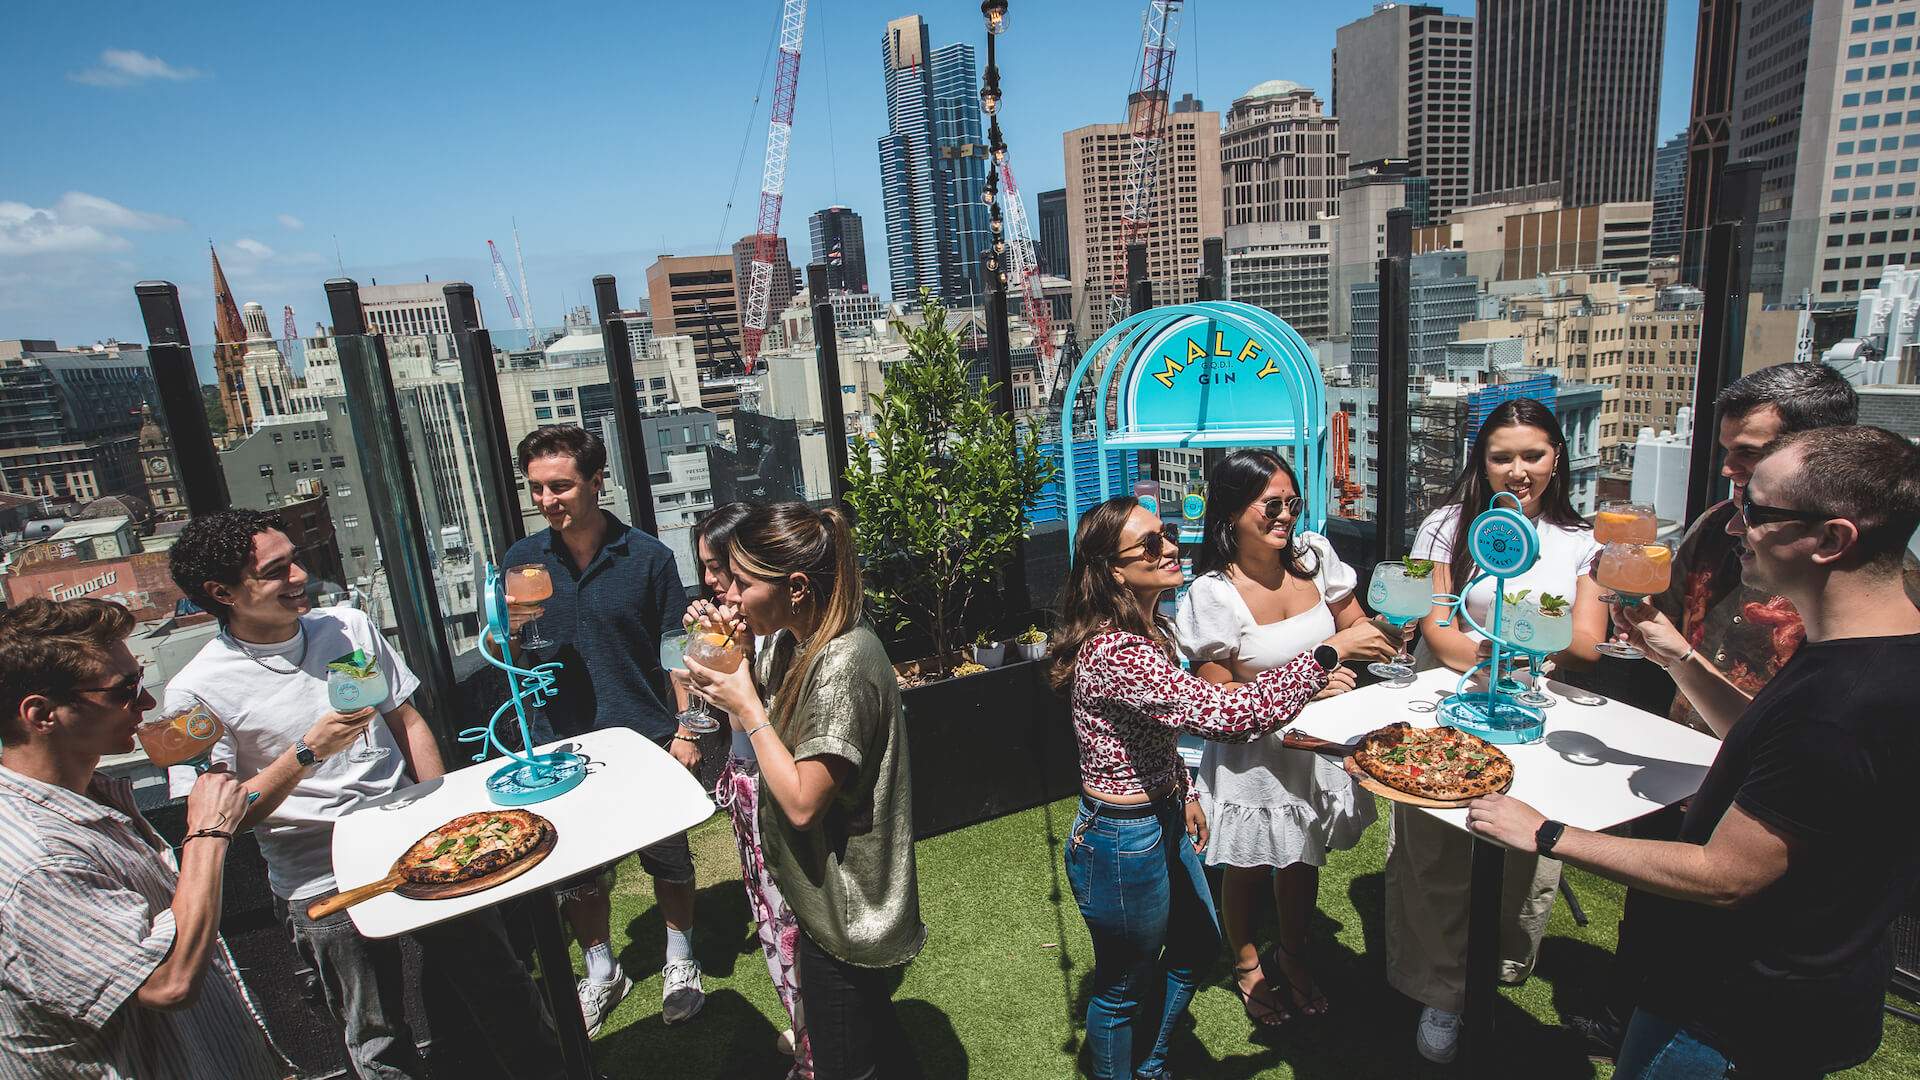 World Pizza Day at Blossome Rooftop Bar in melbourne CBD